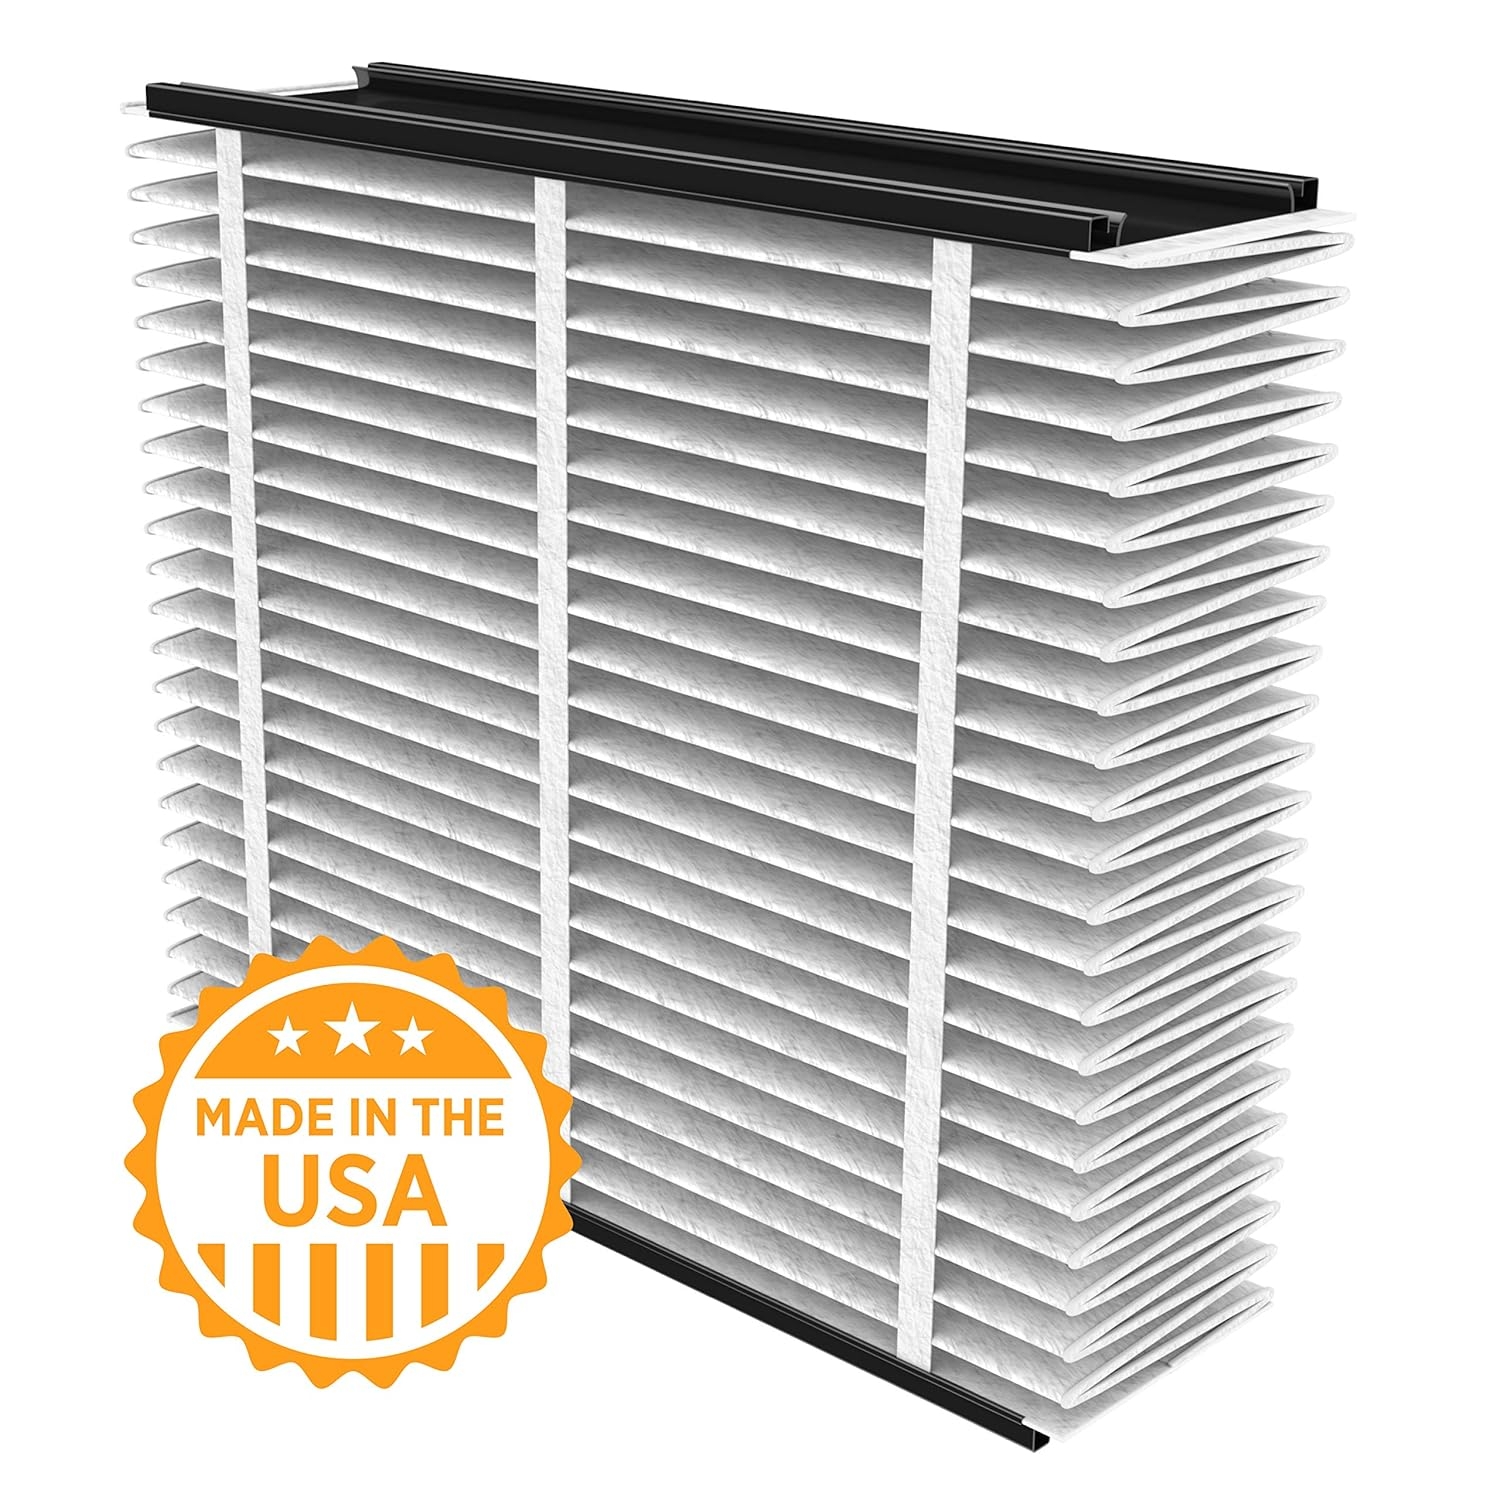 Aprilaire 210 Replacement Air Filter for Aprilaire Whole Home Air Purifiers, Clean Air Dust Filter, MERV 11 (Pack of 1)